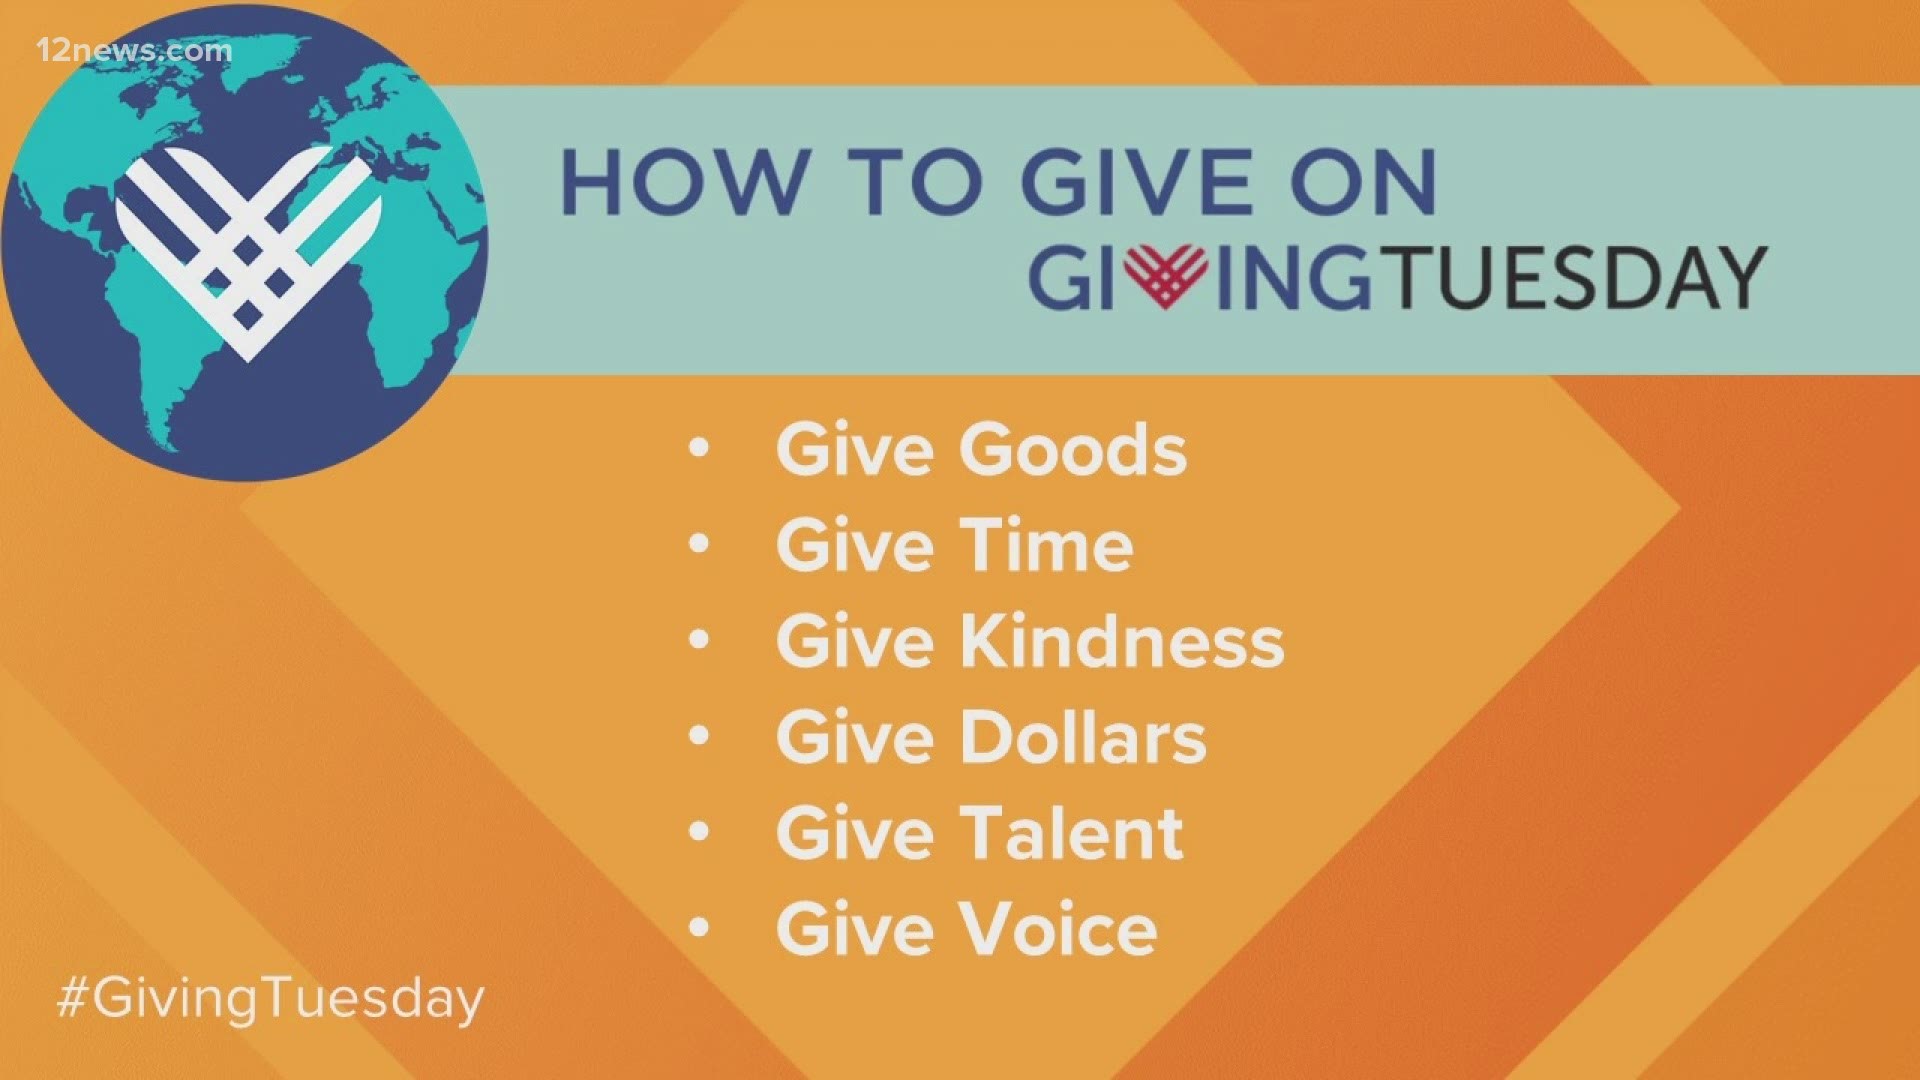 Giving Tuesday gives people a chance to support struggling nonprofit organizations and connect with those in need. Here's how you can help.